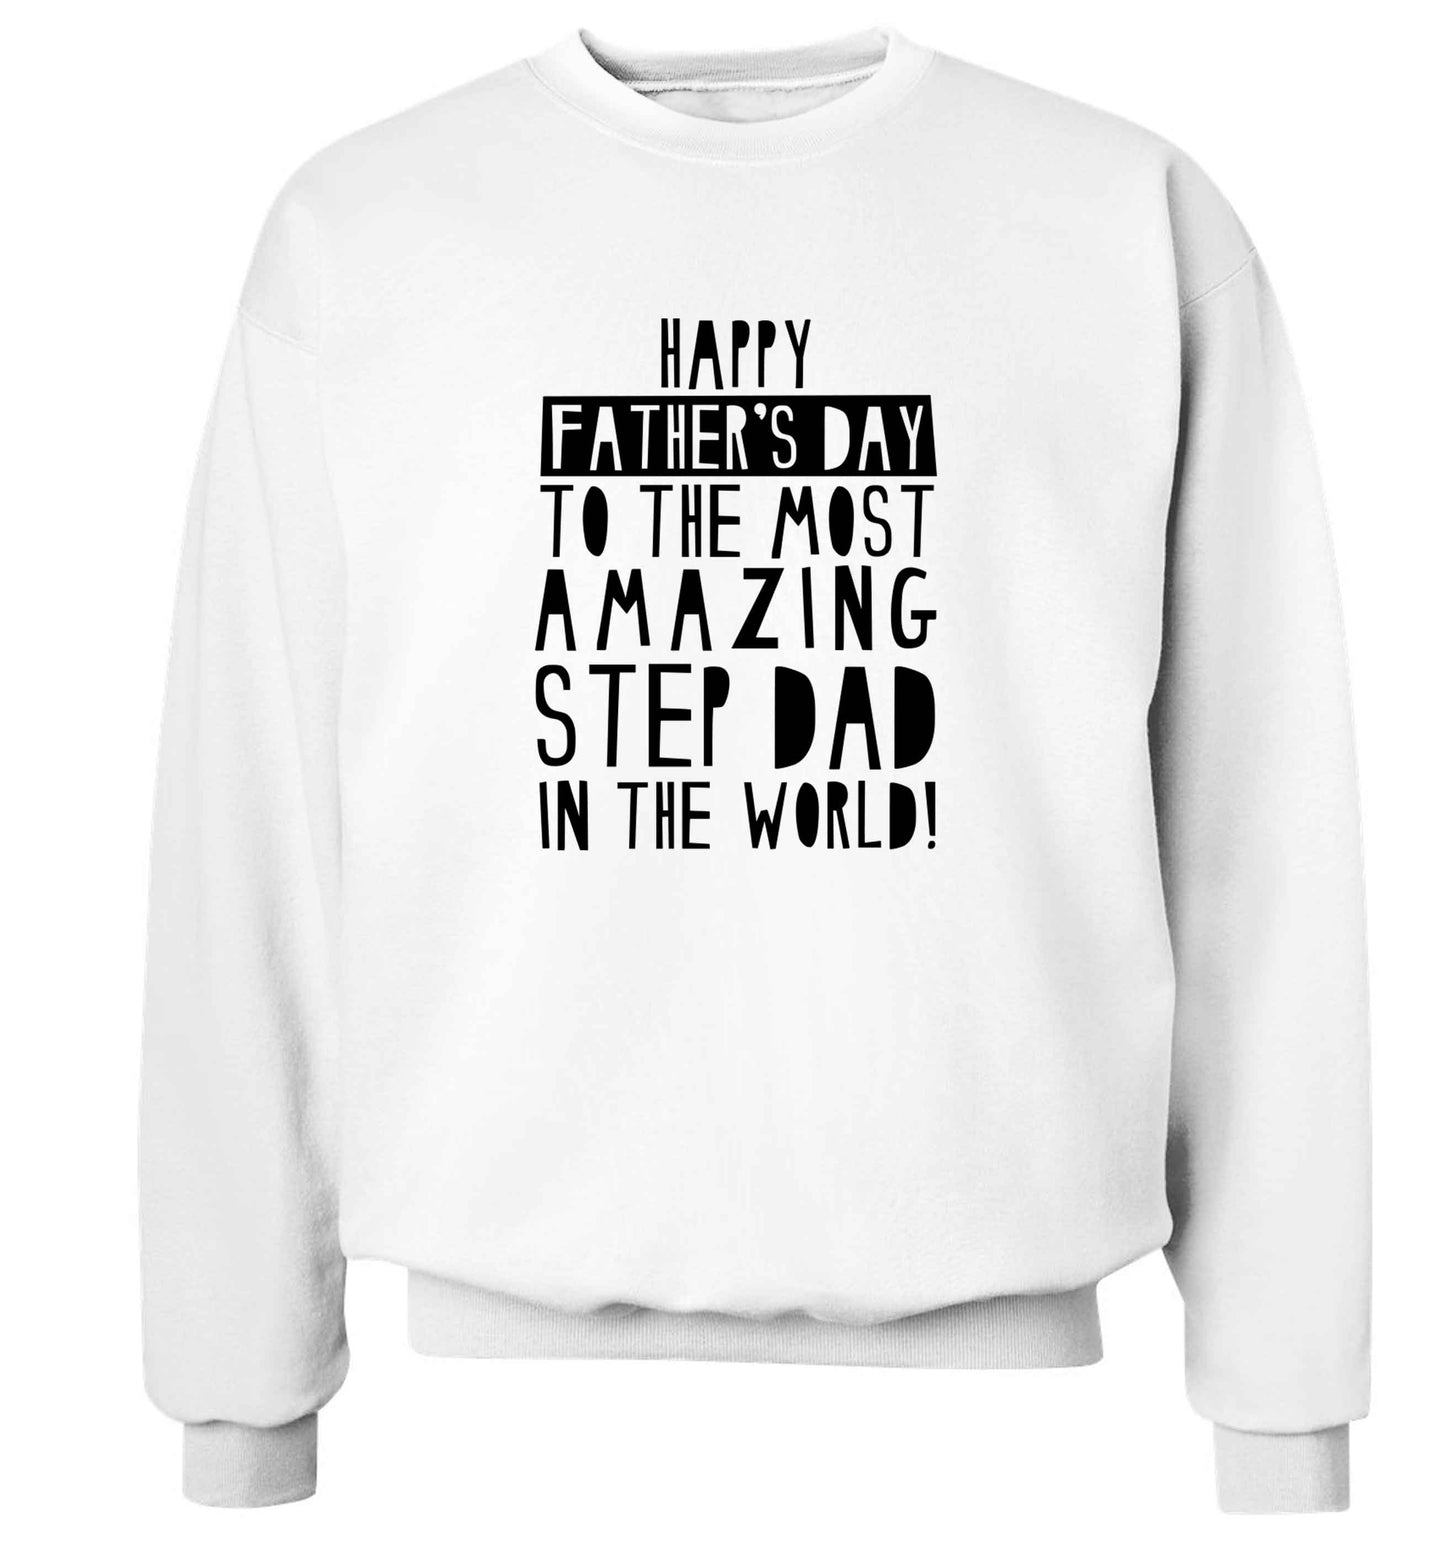 Happy Father's day to the best step dad in the world adult's unisex white sweater 2XL